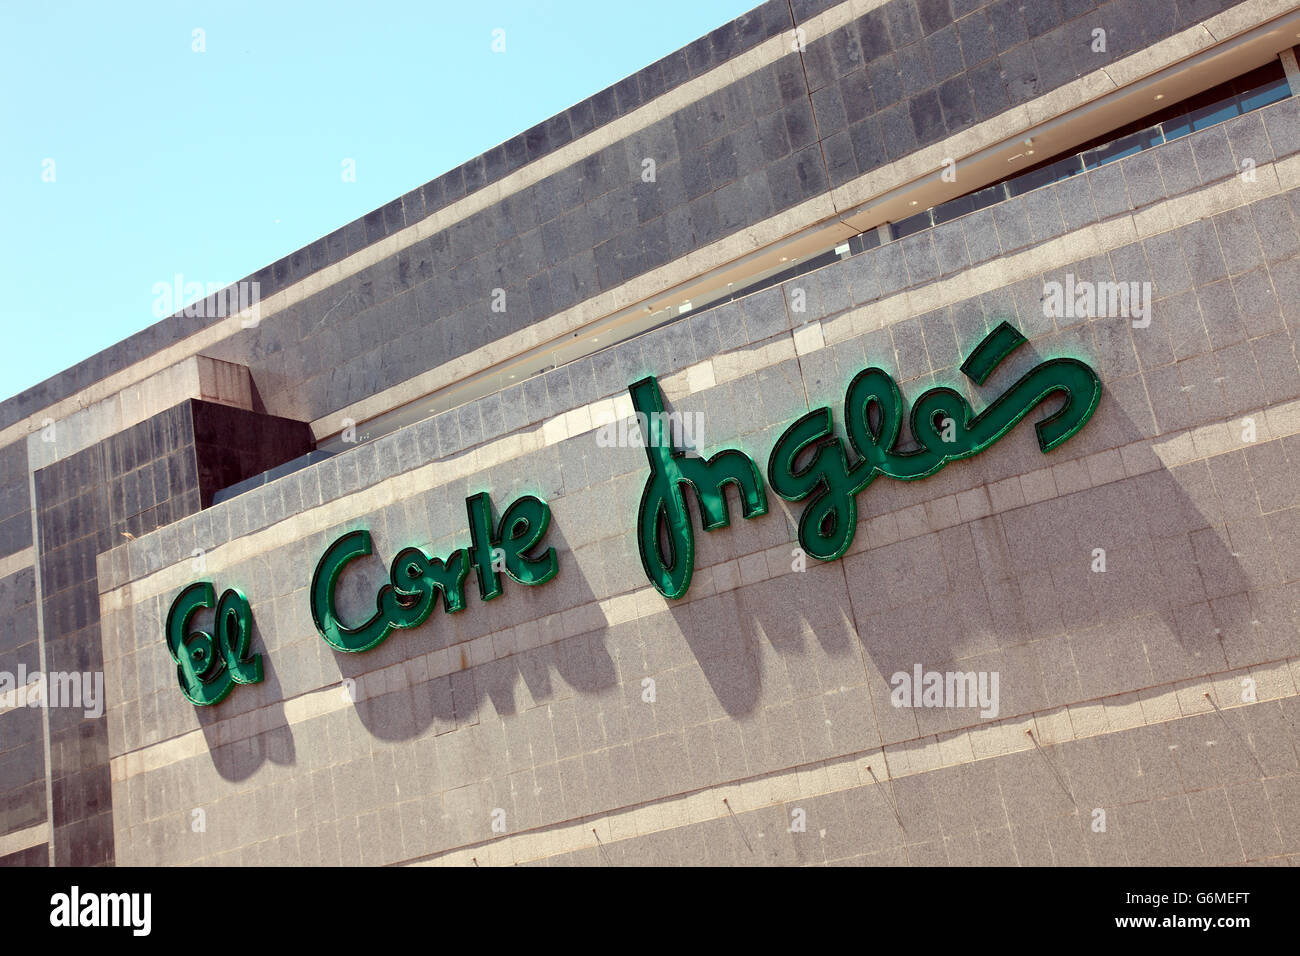 El Corte Ingles in Leon, Europe's large department store group Stock Photo